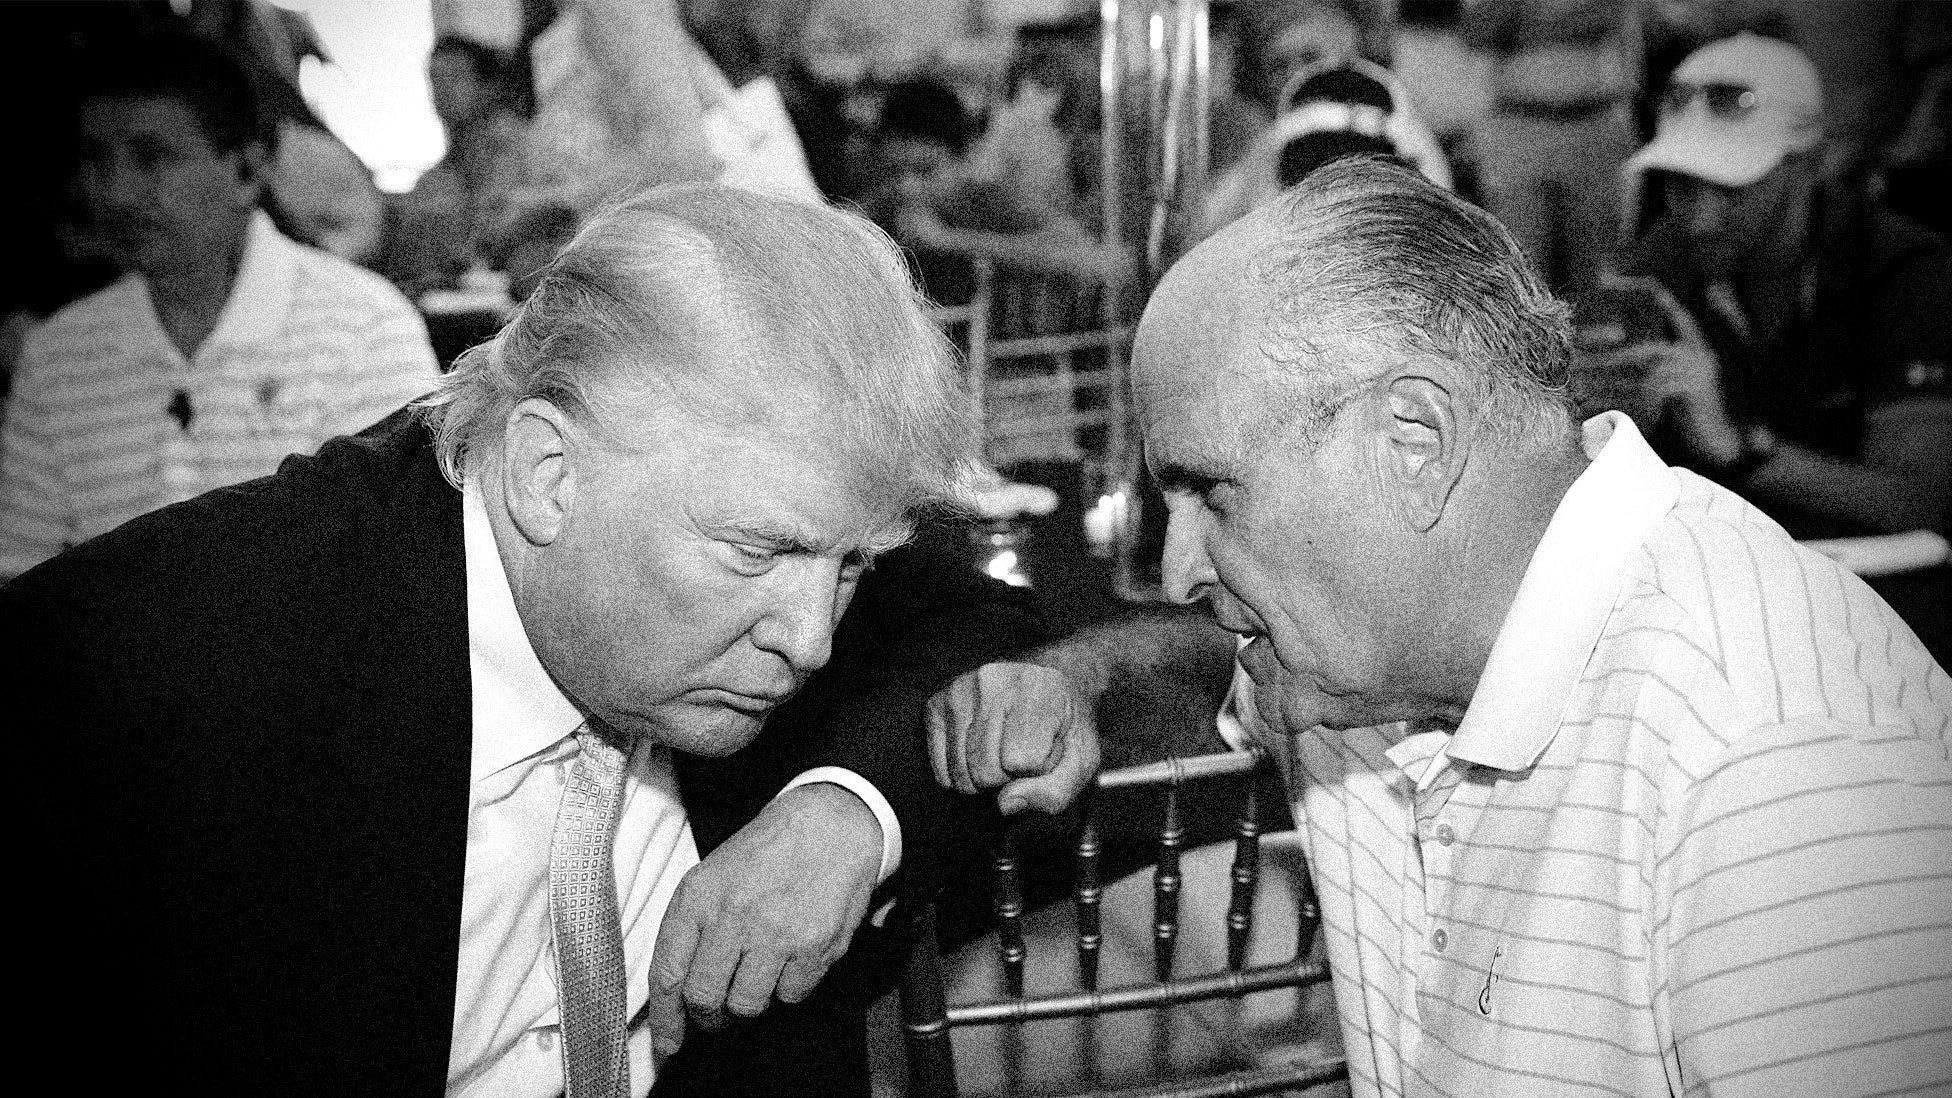 Thenpresidential candidate Donald Trump speaks to Rudy Giuliani at a fundraising event in the Bronx July 6 2015.